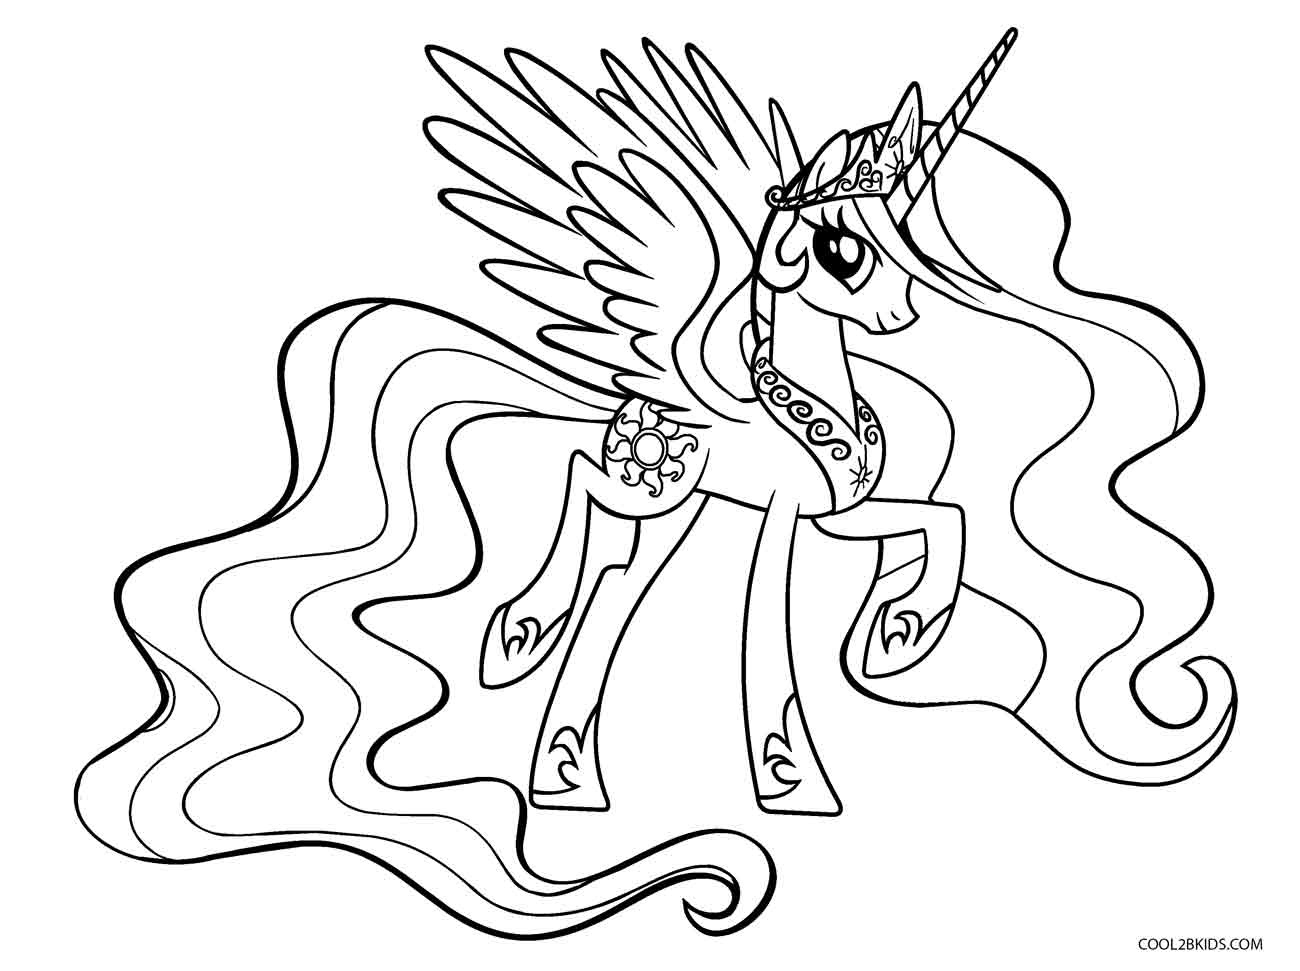 Free Printable My Little Pony Coloring Pages For Kids | Cool2Bkids - Free Printable My Little Pony Coloring Pages